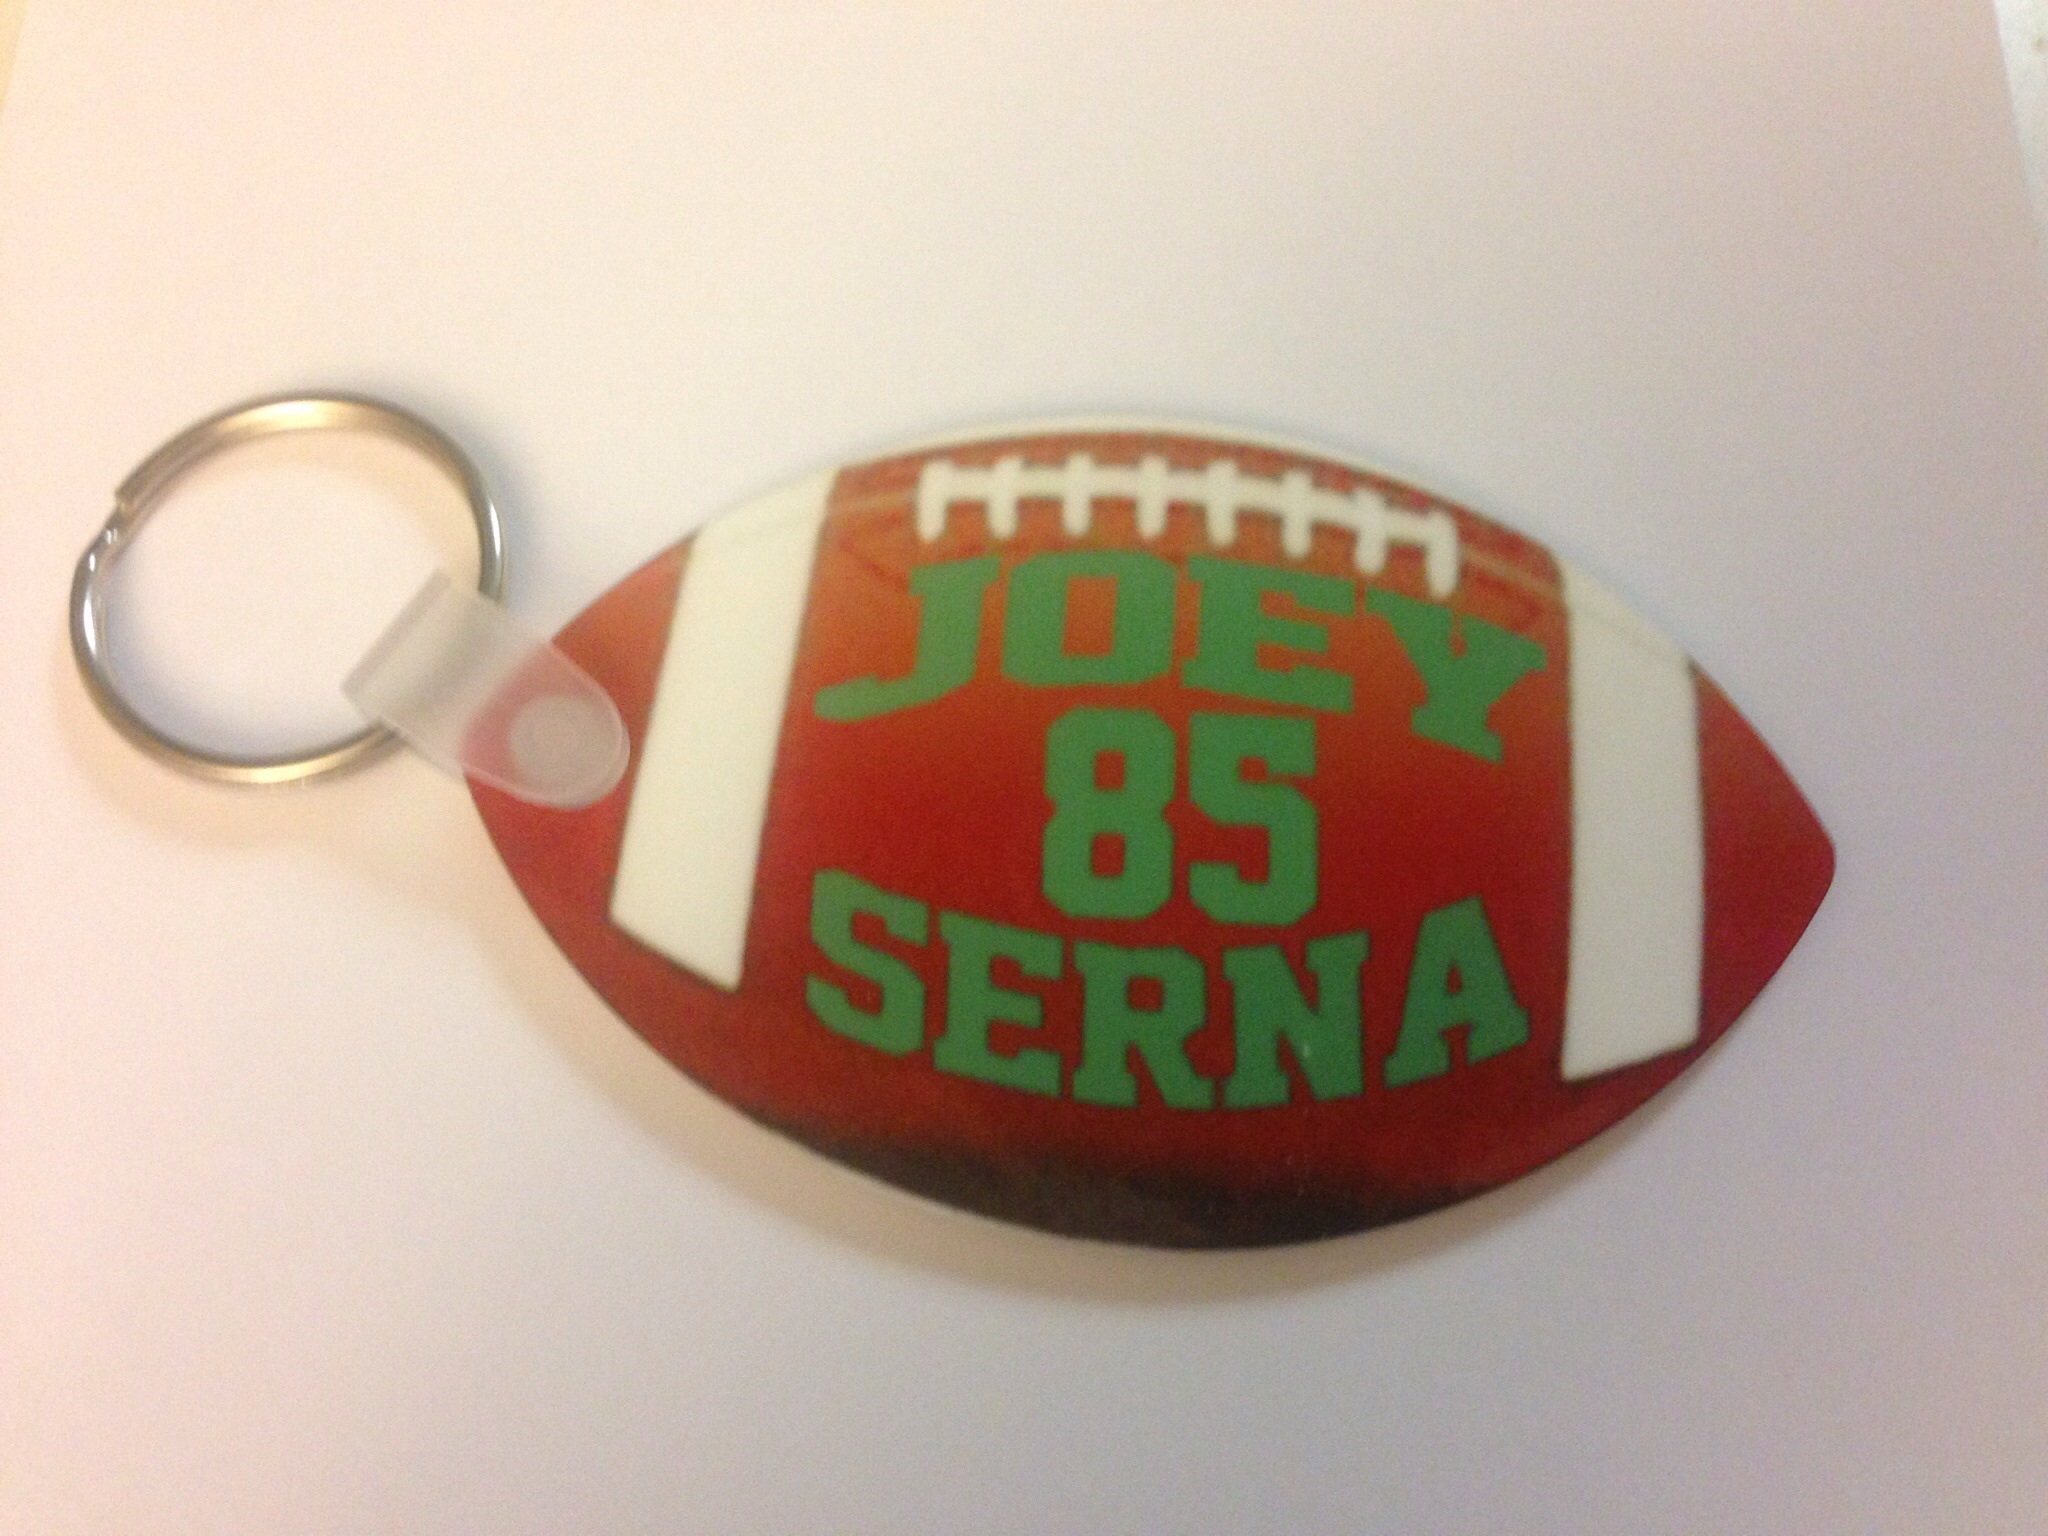 Football Key Chain made with sublimation printing